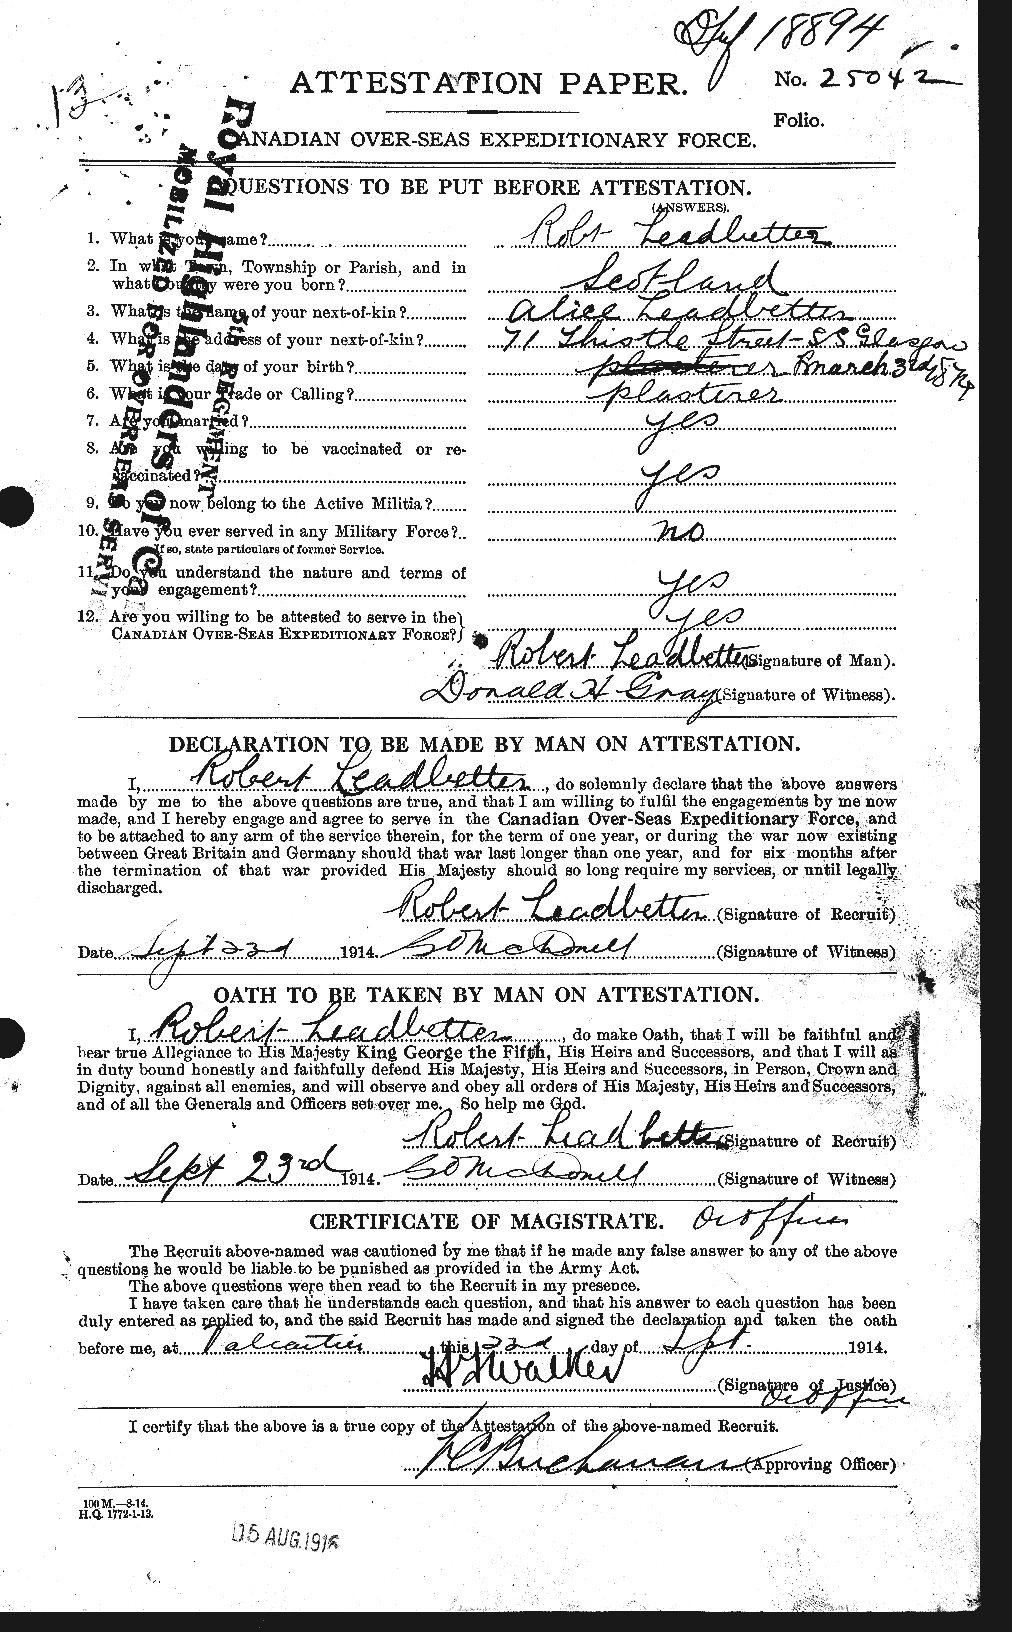 Personnel Records of the First World War - CEF 455847a